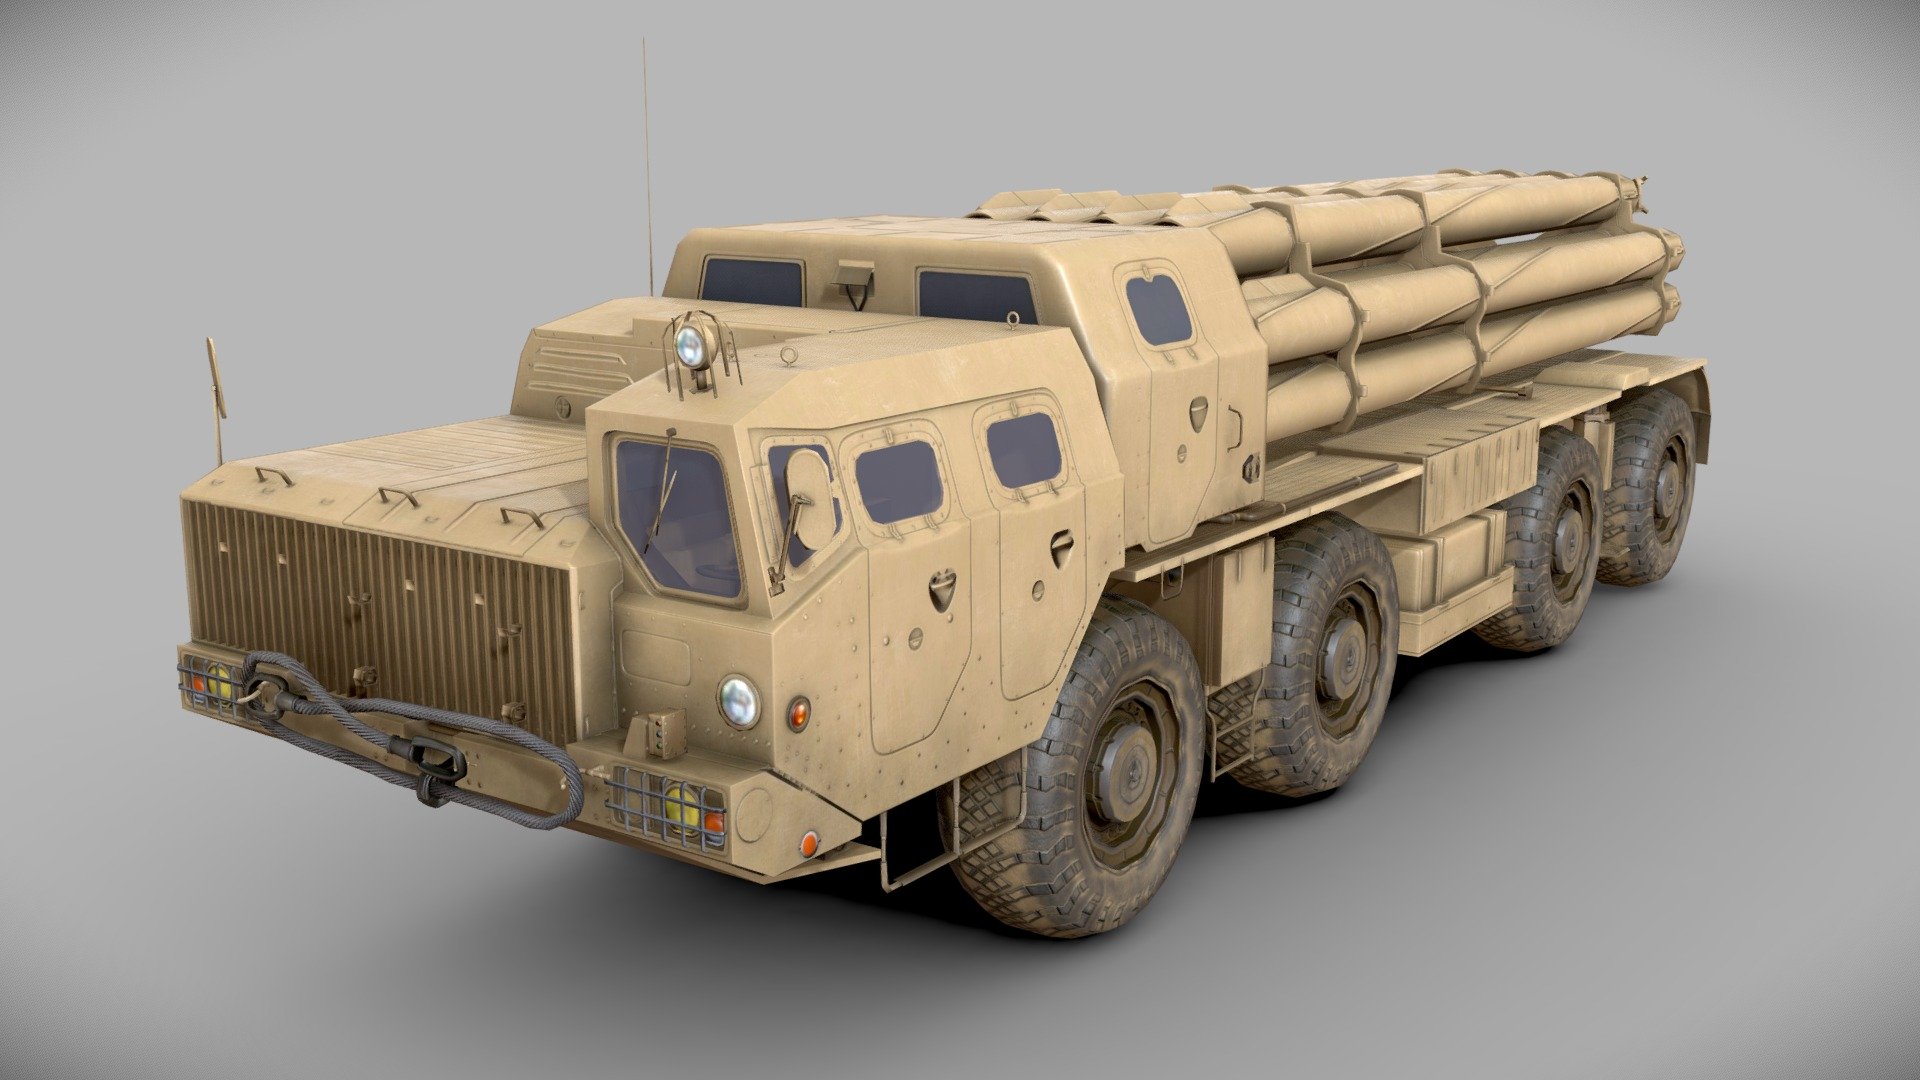 BM-30 Smerch 9A52 MLRS 
One of the strongest motorized multirocket launcher systems. 
Originaly invented by the Sowjet Union around 1980, today mainly used by Russia, Ukraine and China

Lowpoly: 12.750p

Highpoly and more to this model here - Artstation: https://www.artstation.com/artwork/yJVBVx - BM-30 Smerch 9A52 MLRS - 3D model by Jonas Schramme (@JonasSchramme) 3d model